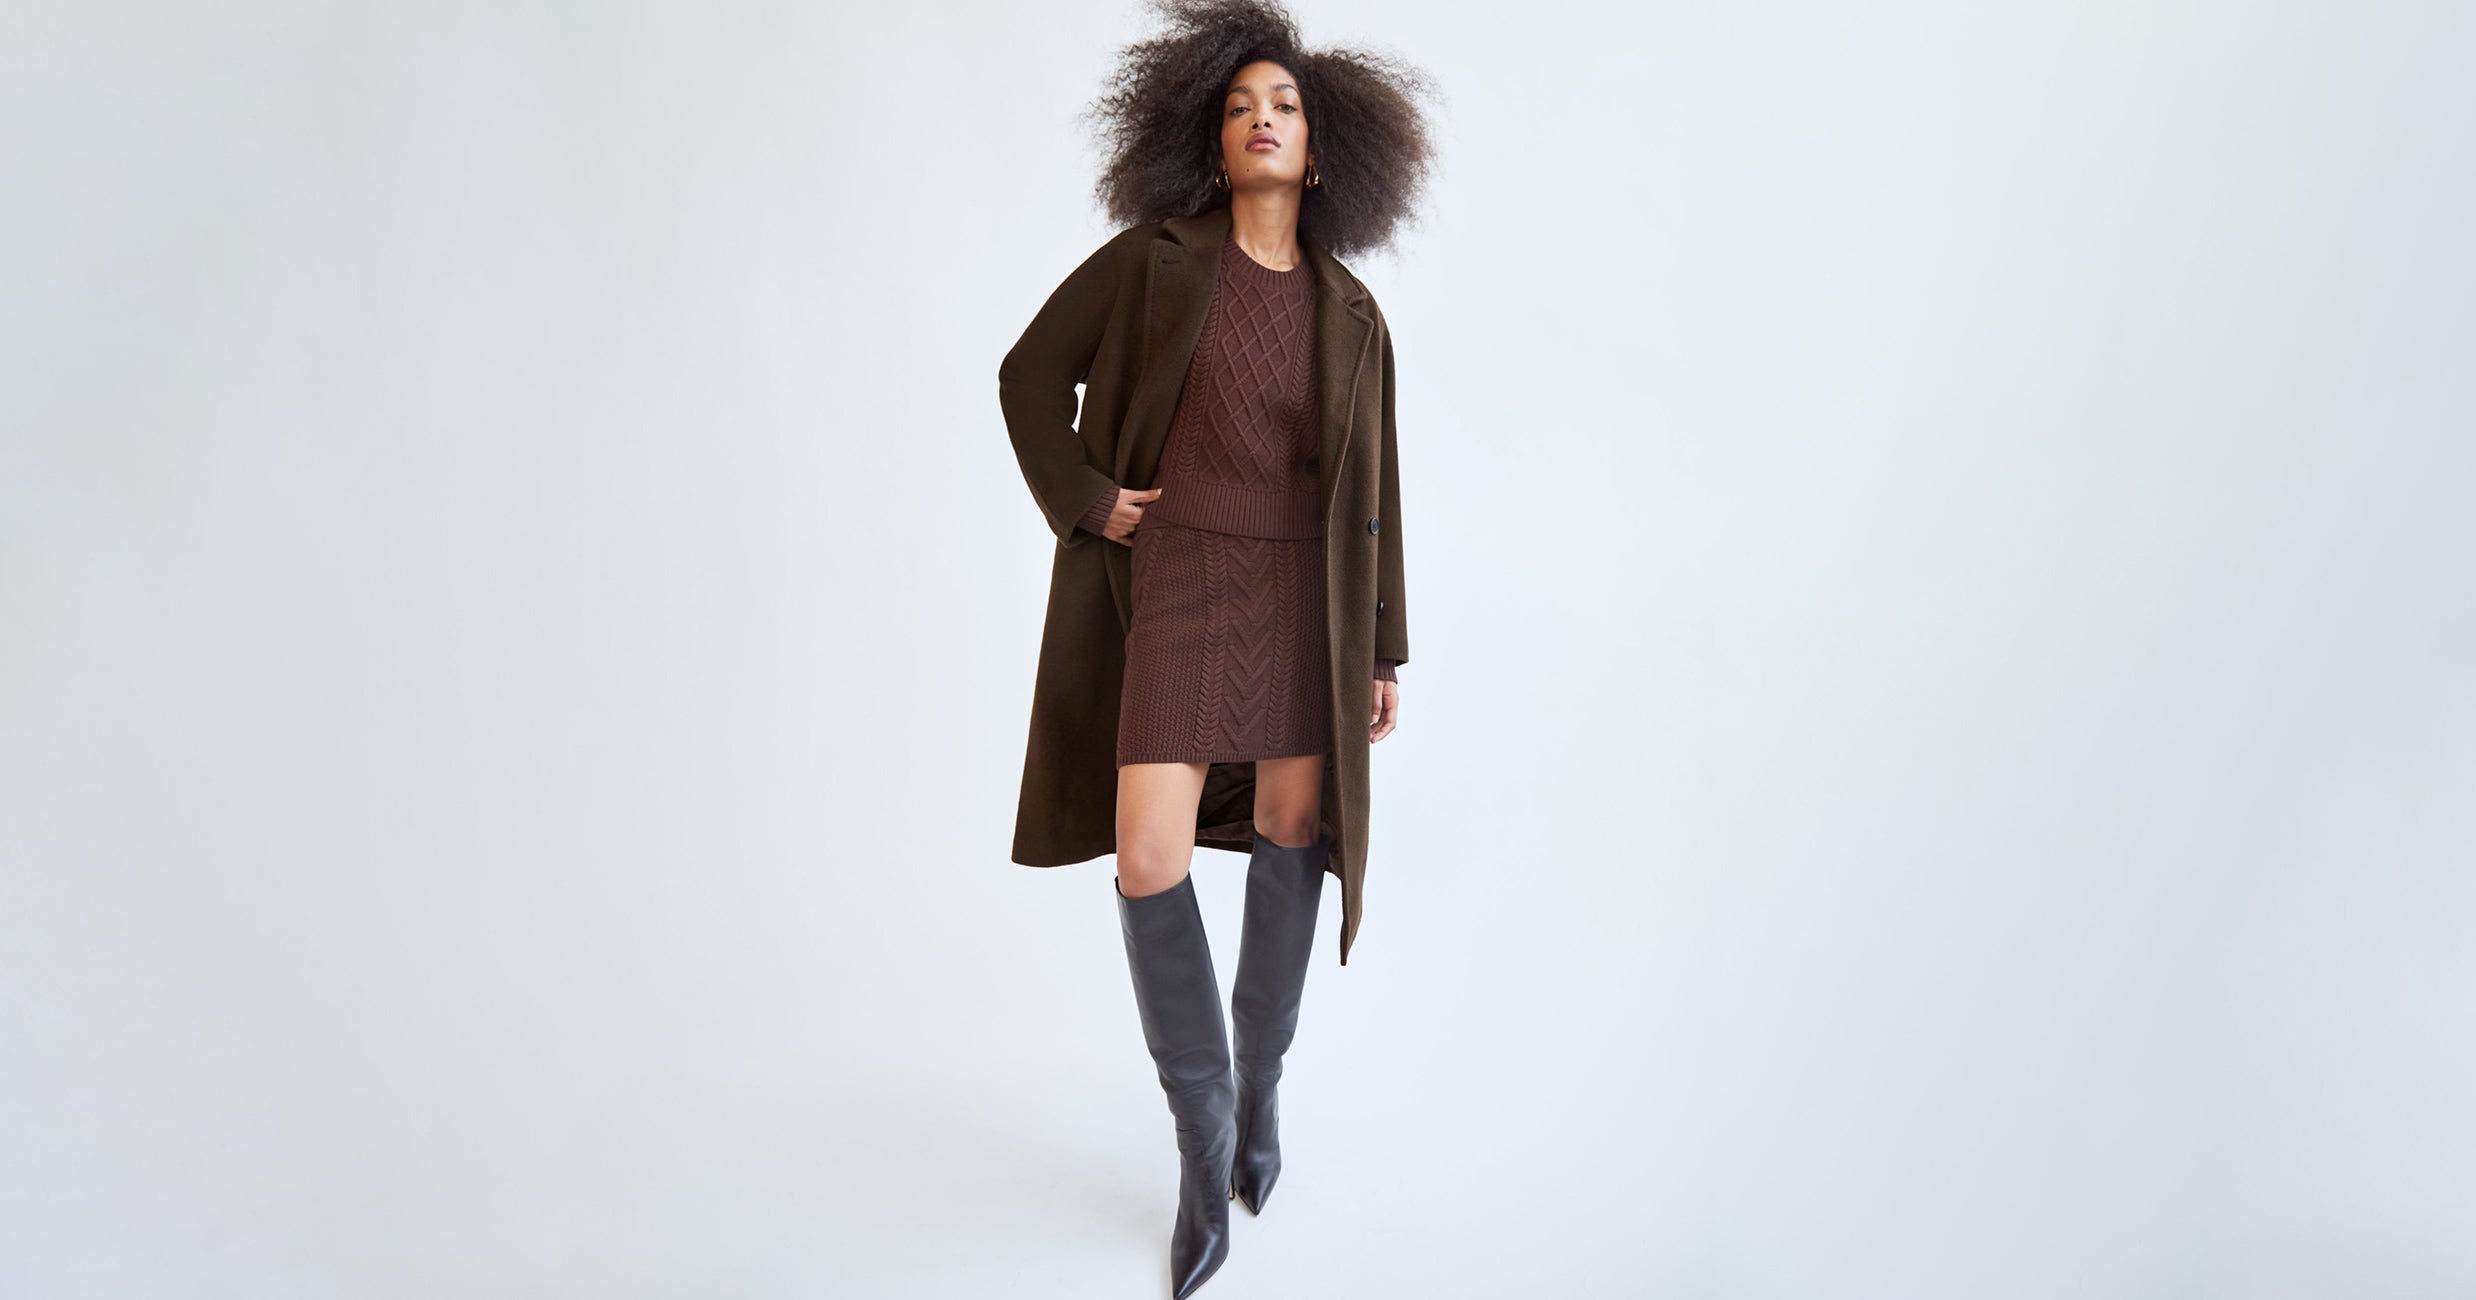 Brown Is The Underrated Color You Should Wear